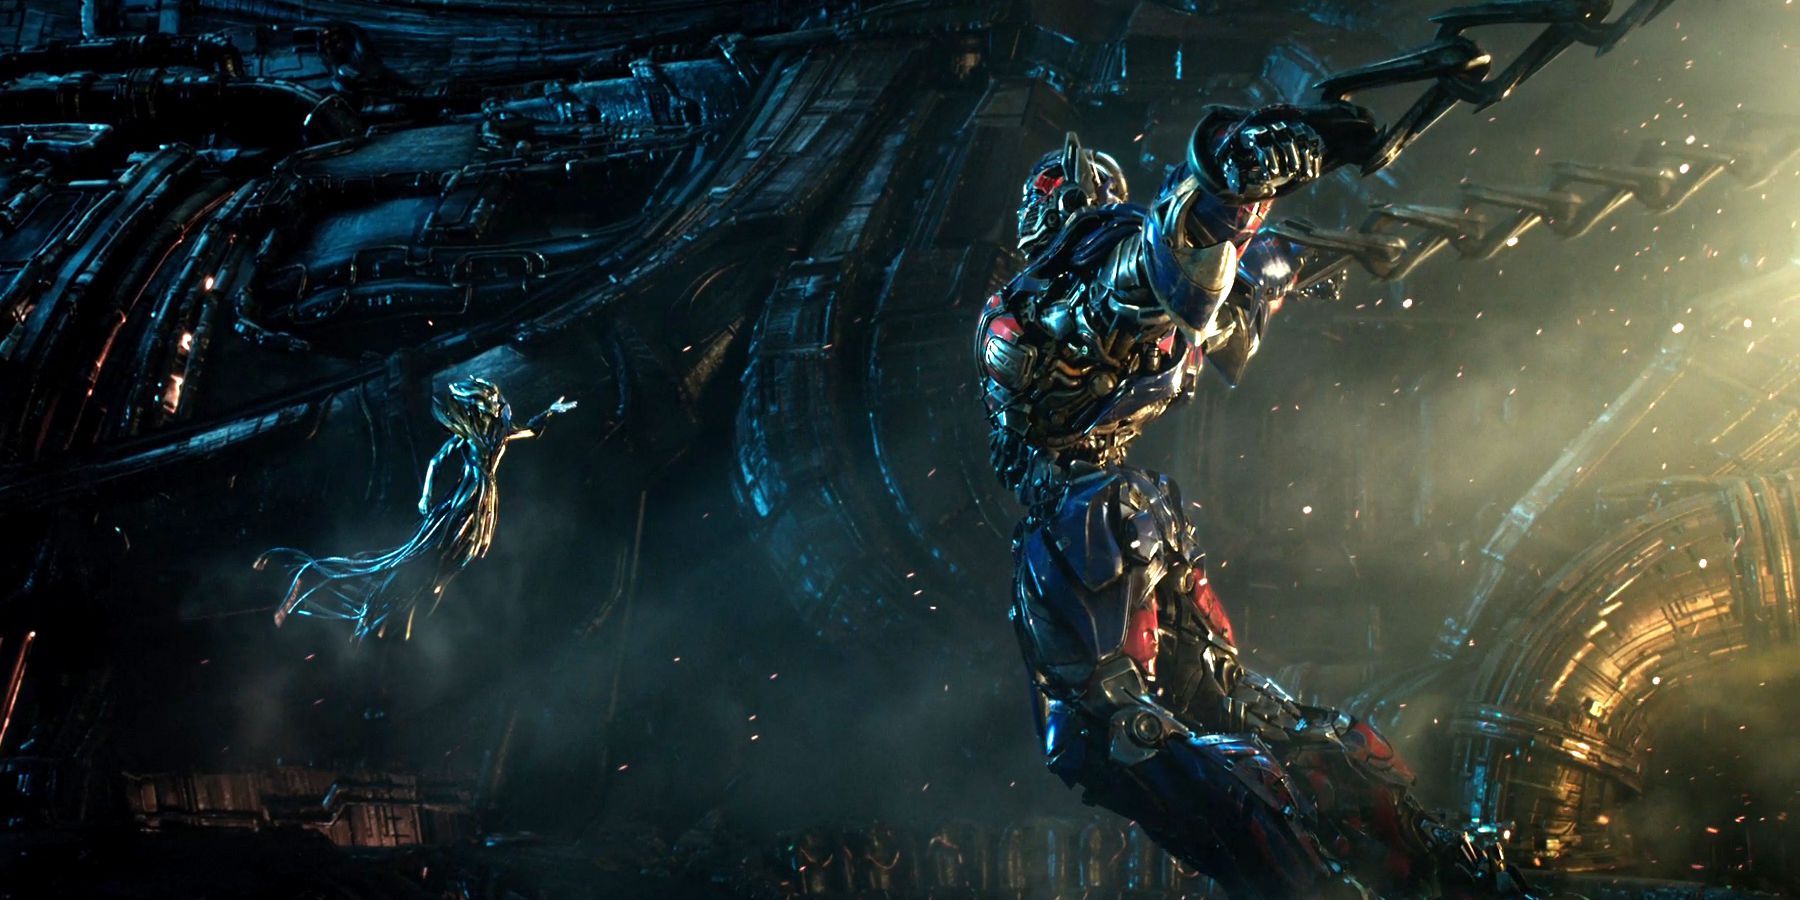 Transformers The Last Knight - Optimus Prime in chains